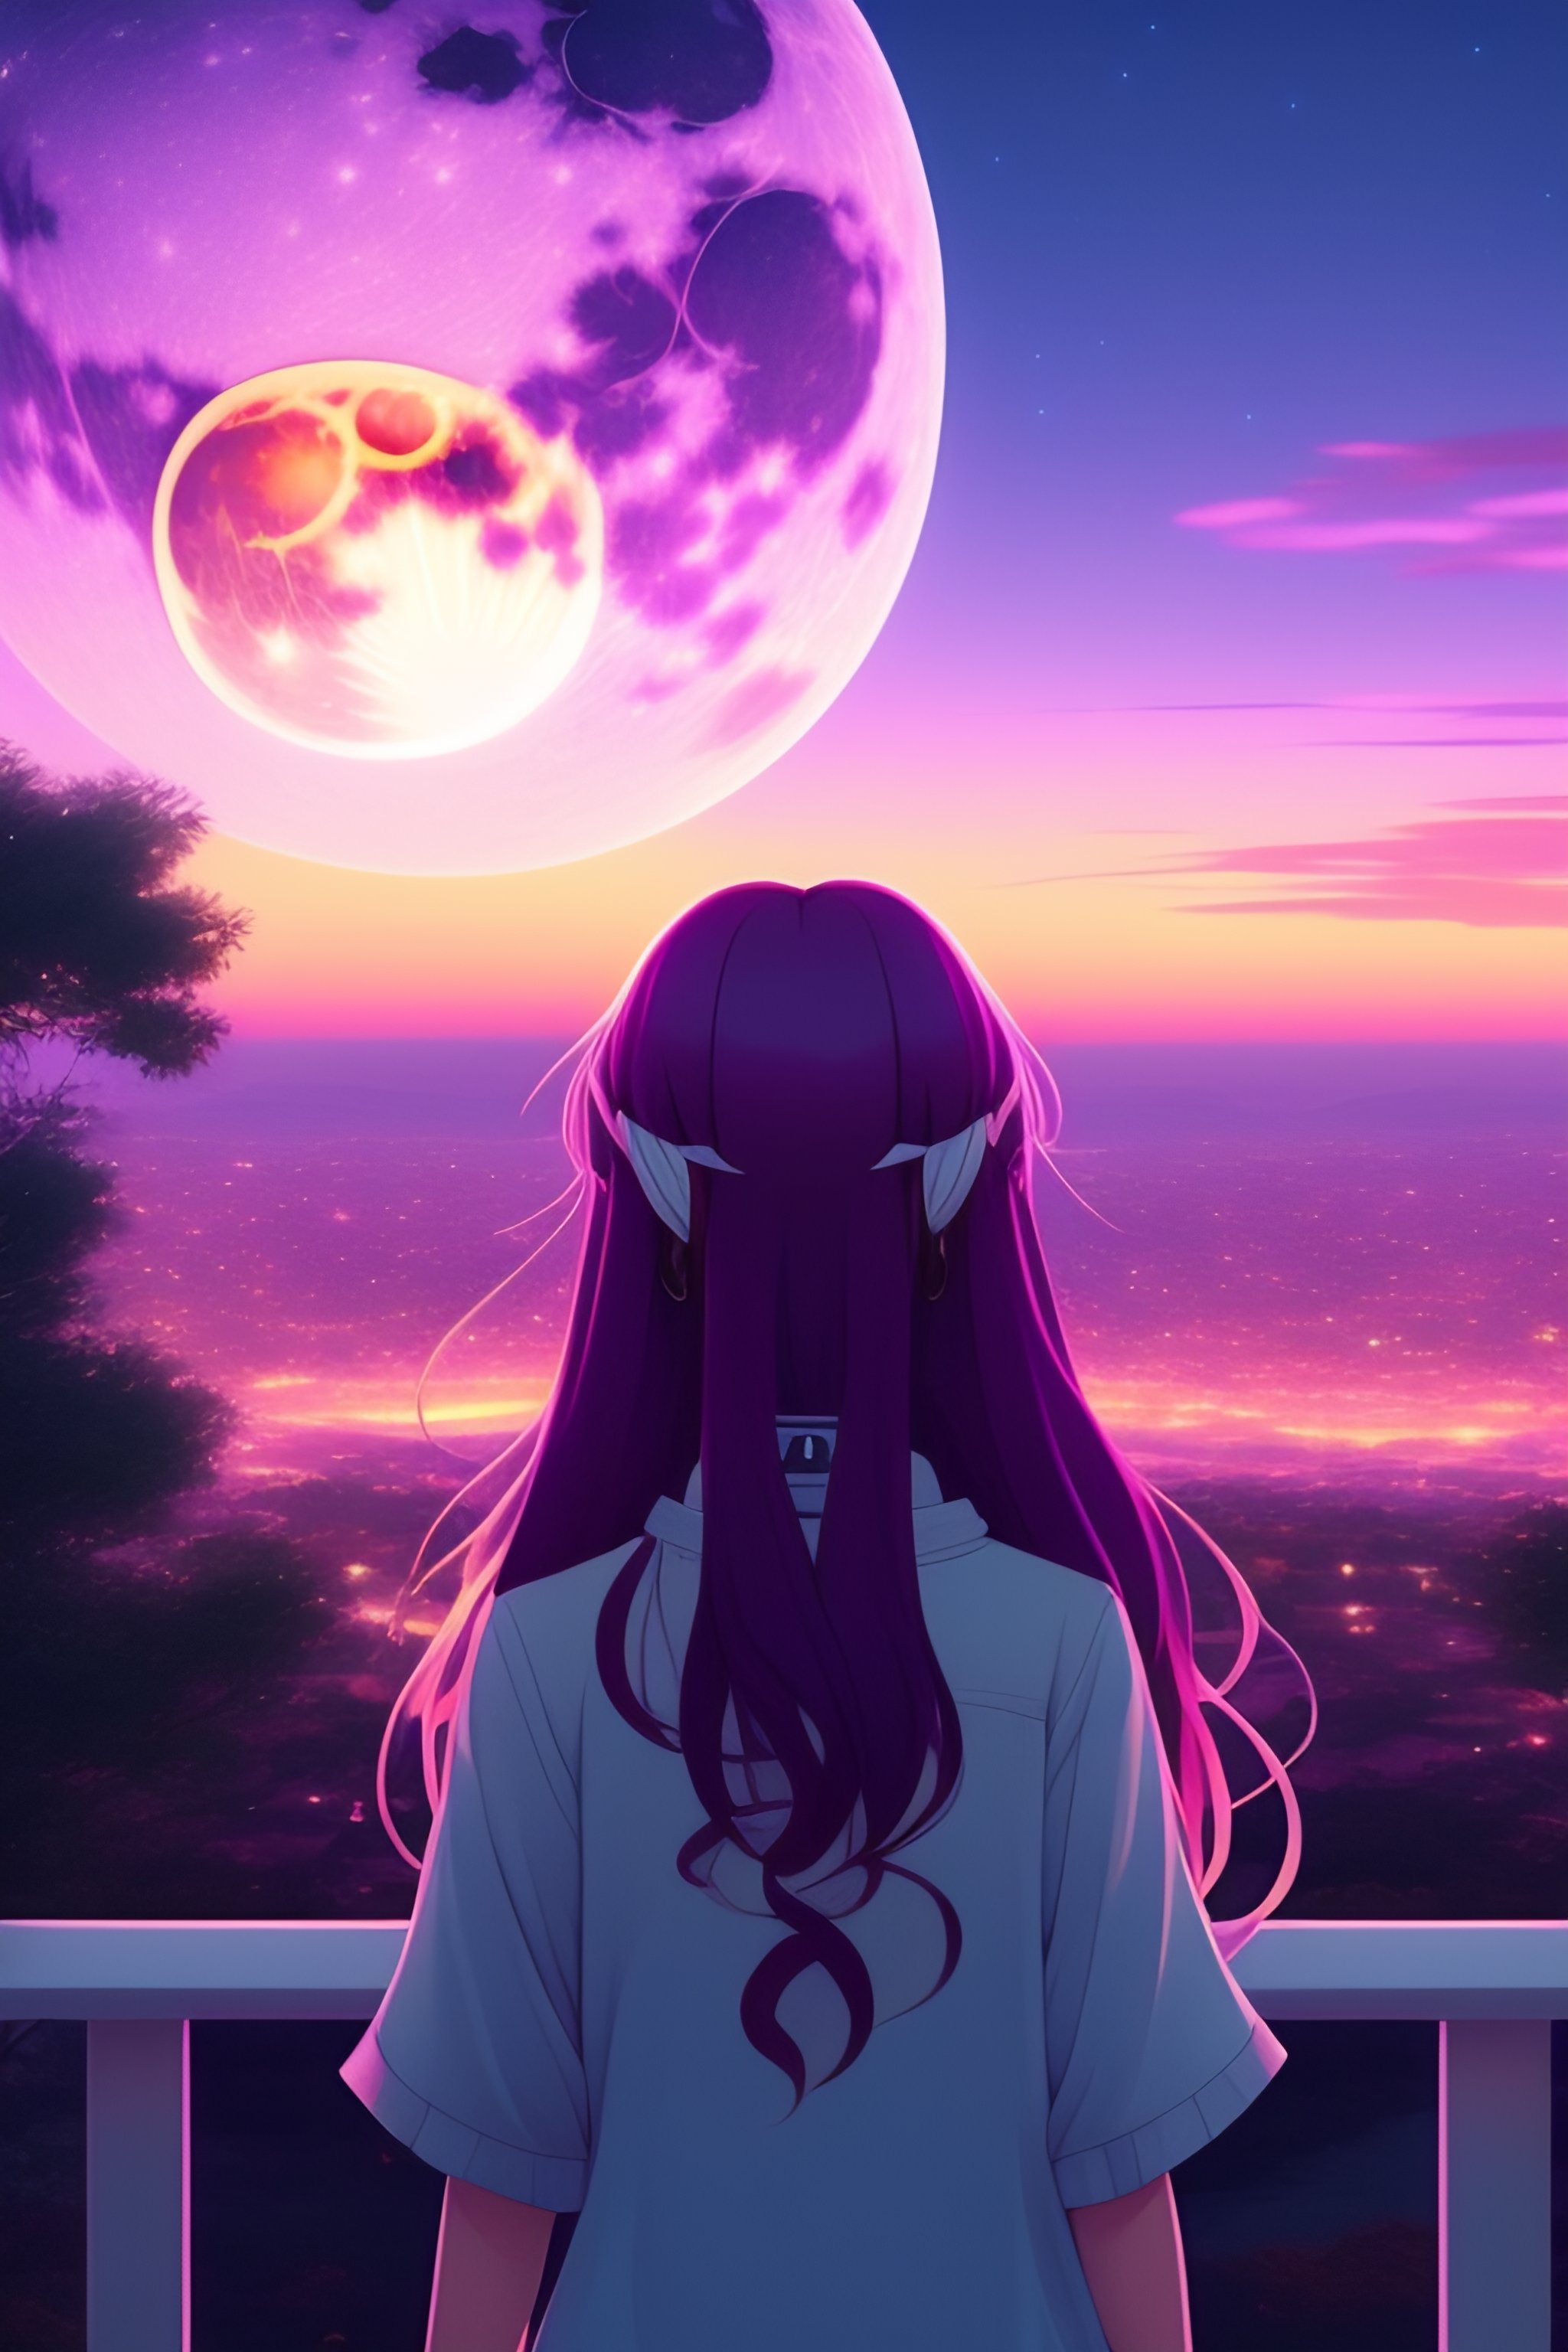 Lexica - Full moon, pink moon, anime, anime girl, long hair, view in  camera, no floor